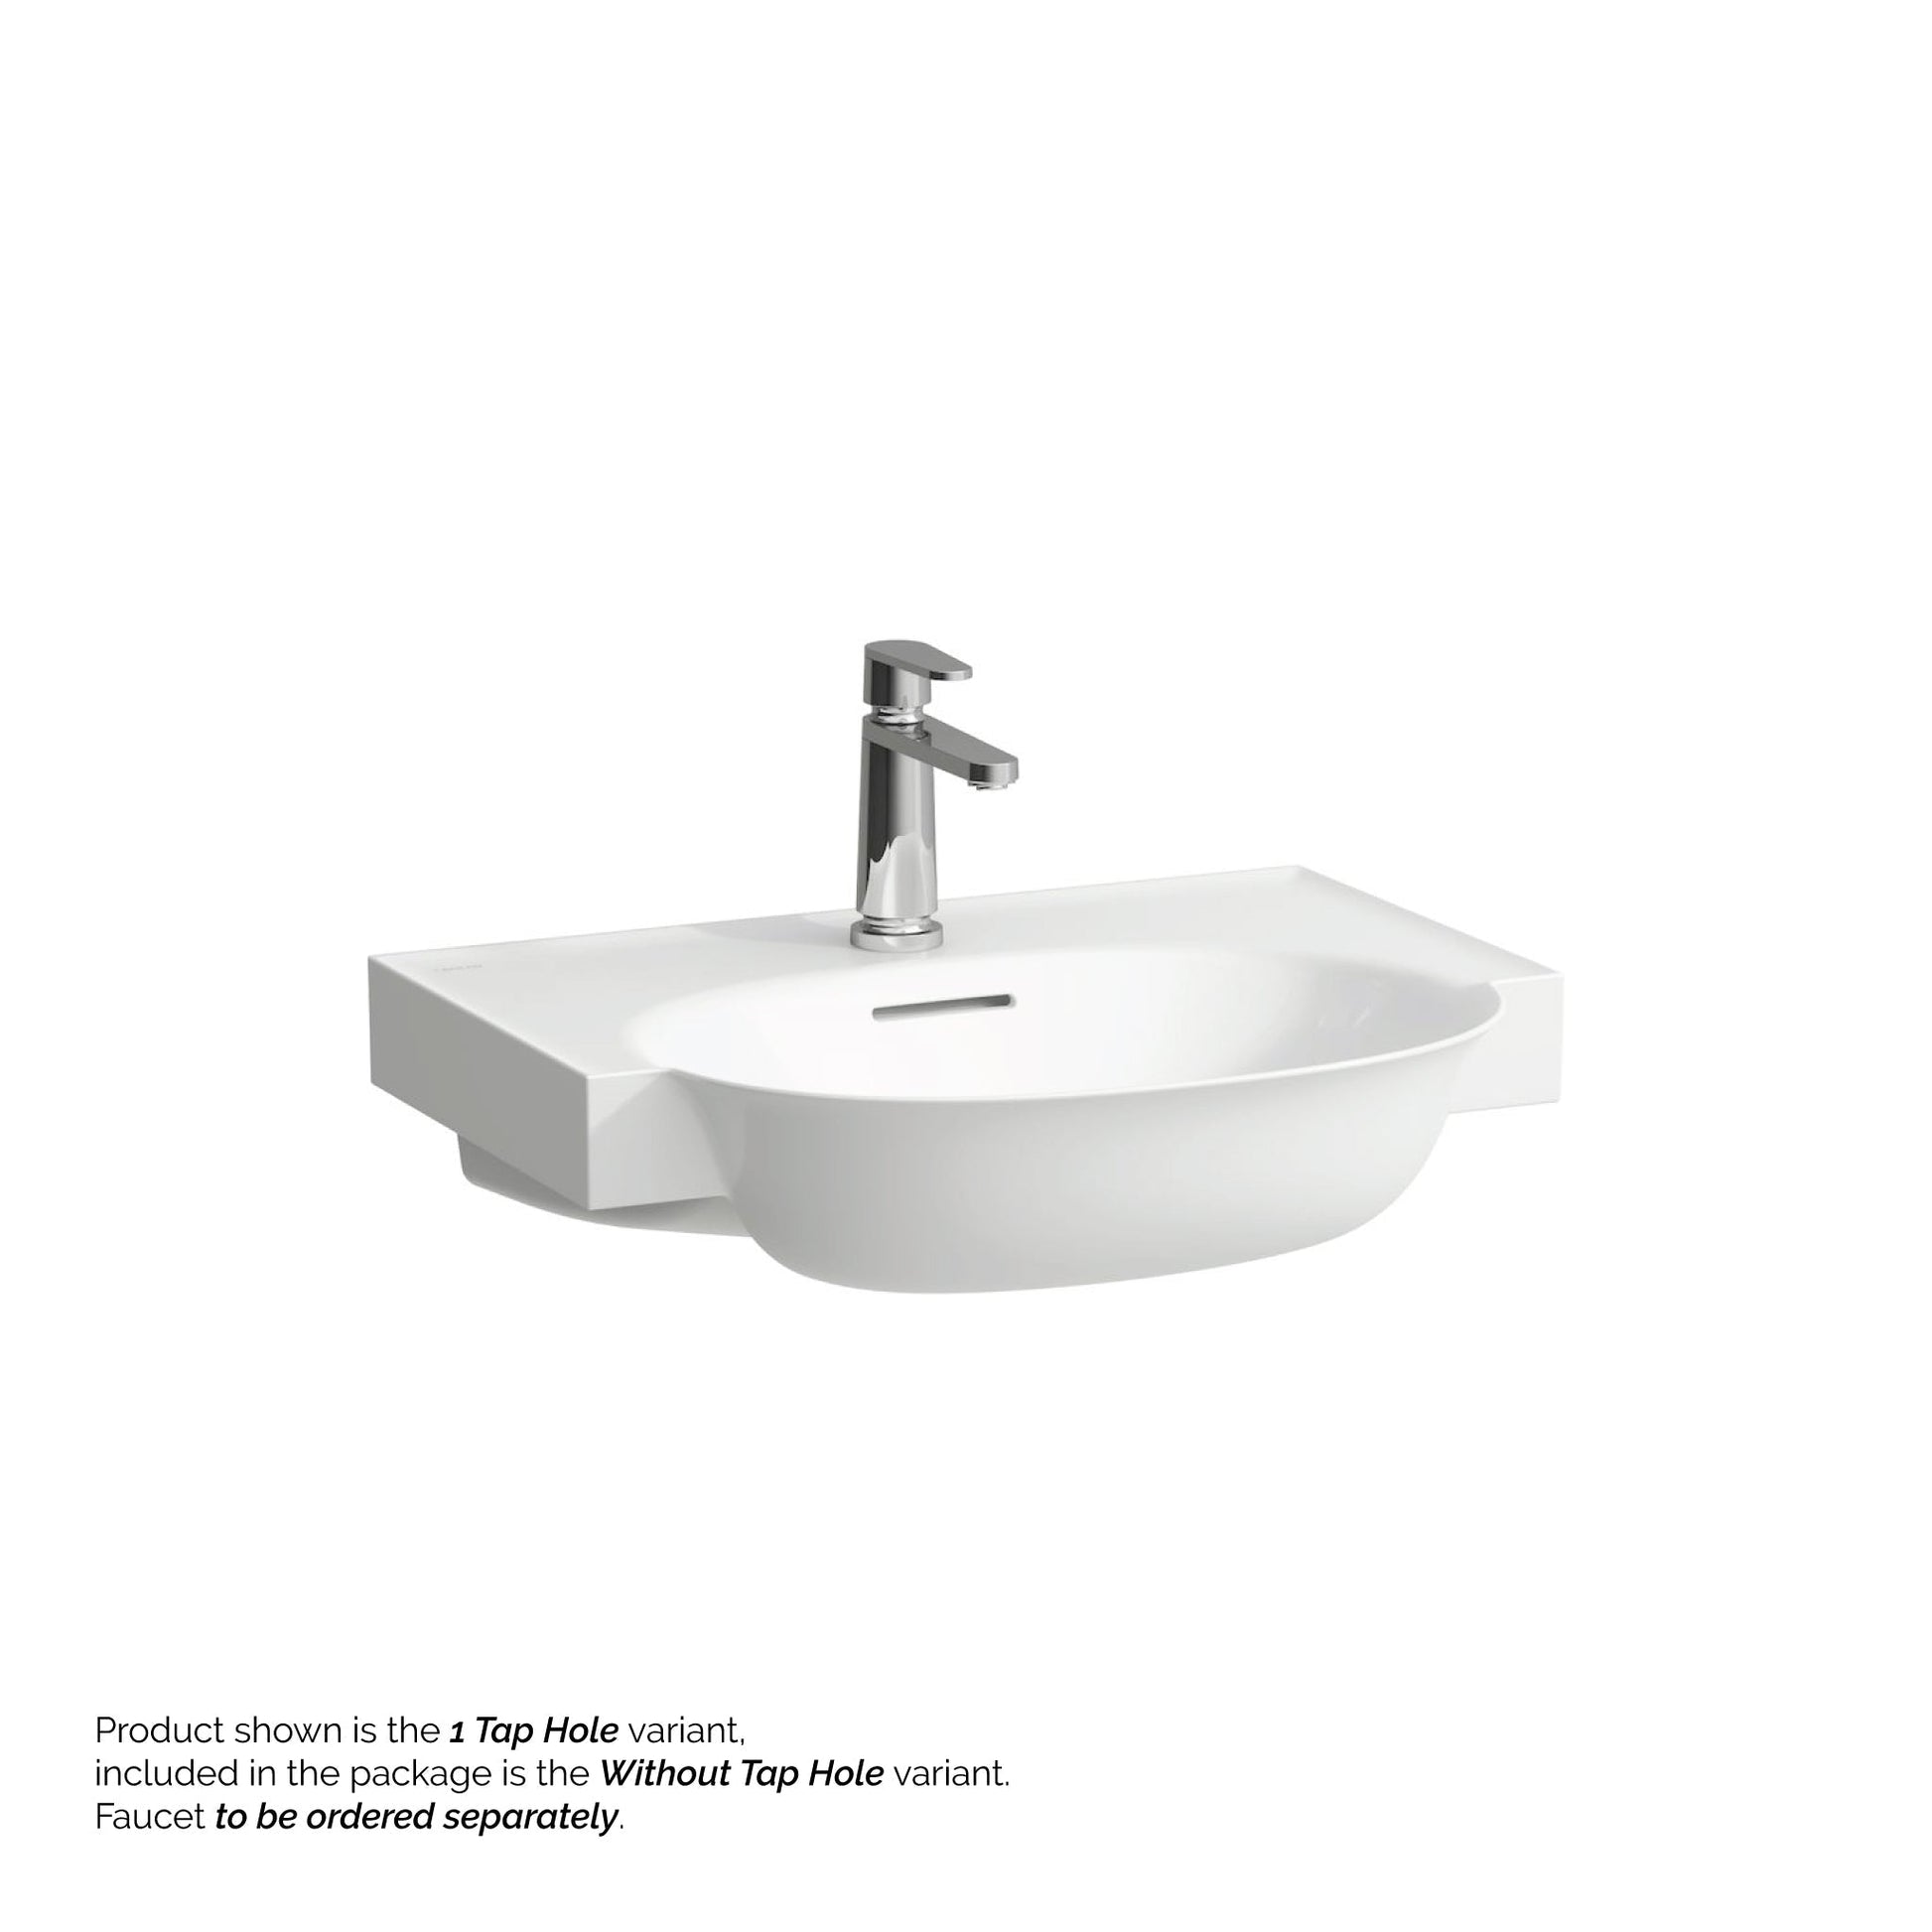 Laufen New Classic 24" x 19" White Ceramic Wall-Mounted Bathroom Sink Without Faucet Hole